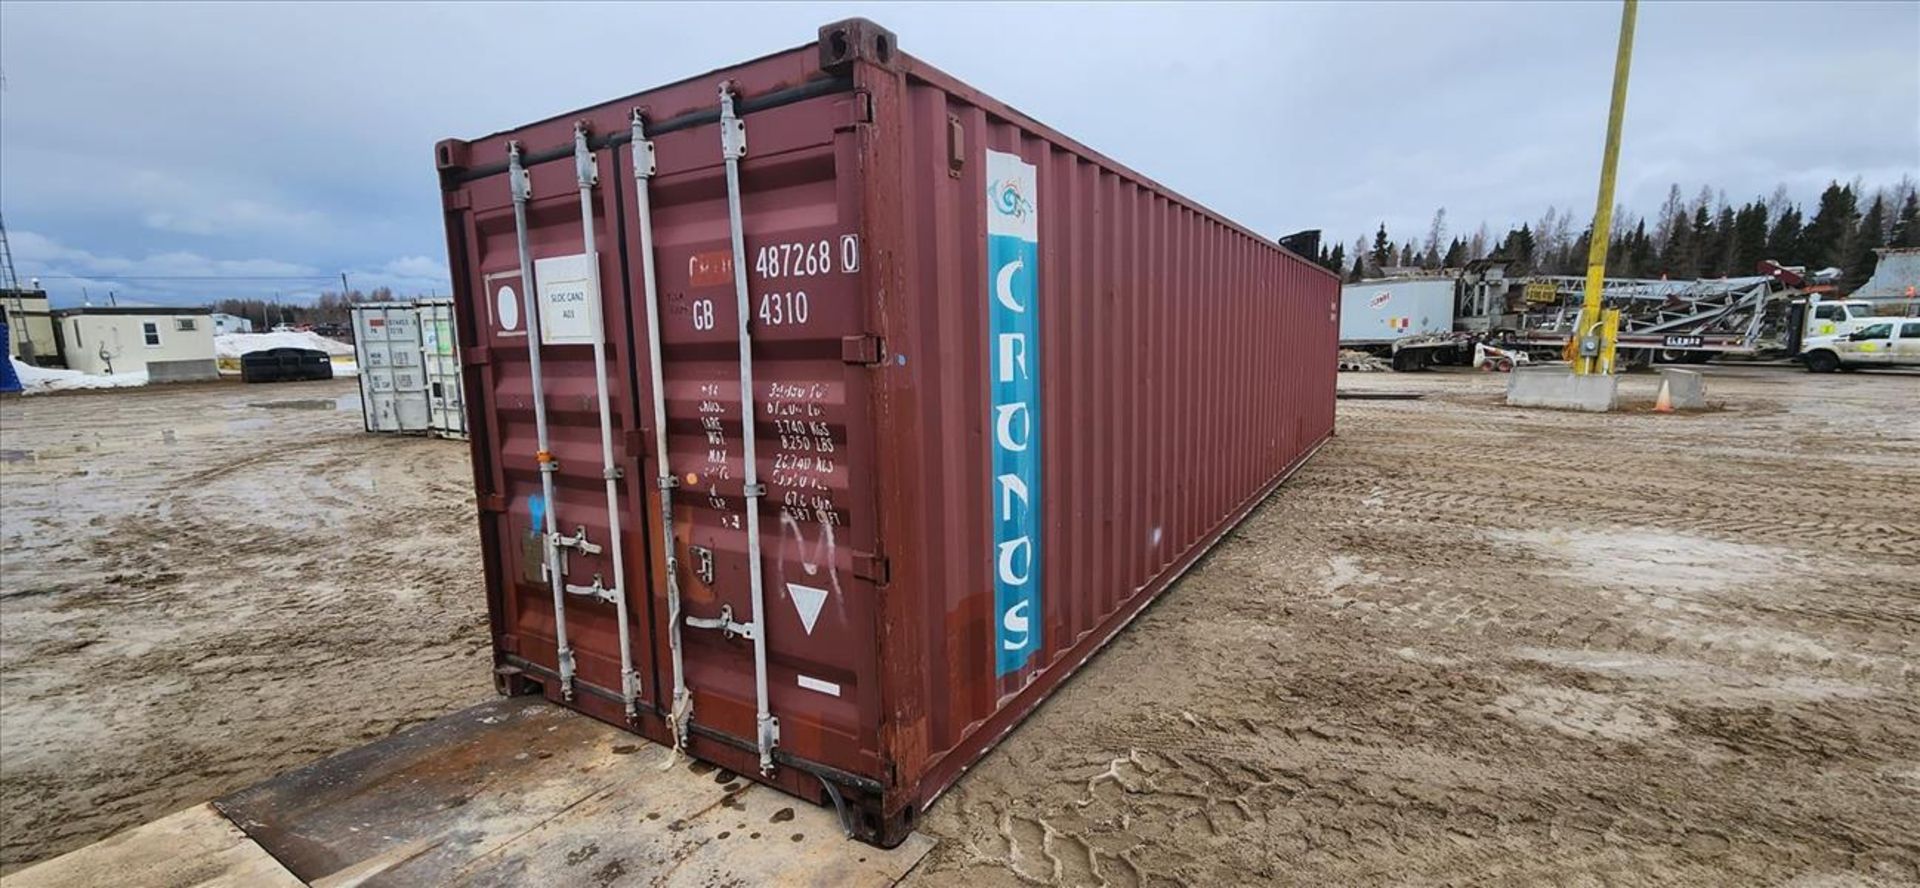 sea container, 40 ft. c/w contents; shelving and spare parts (Asset Location: Hallnor Yard) {Day - Image 2 of 2